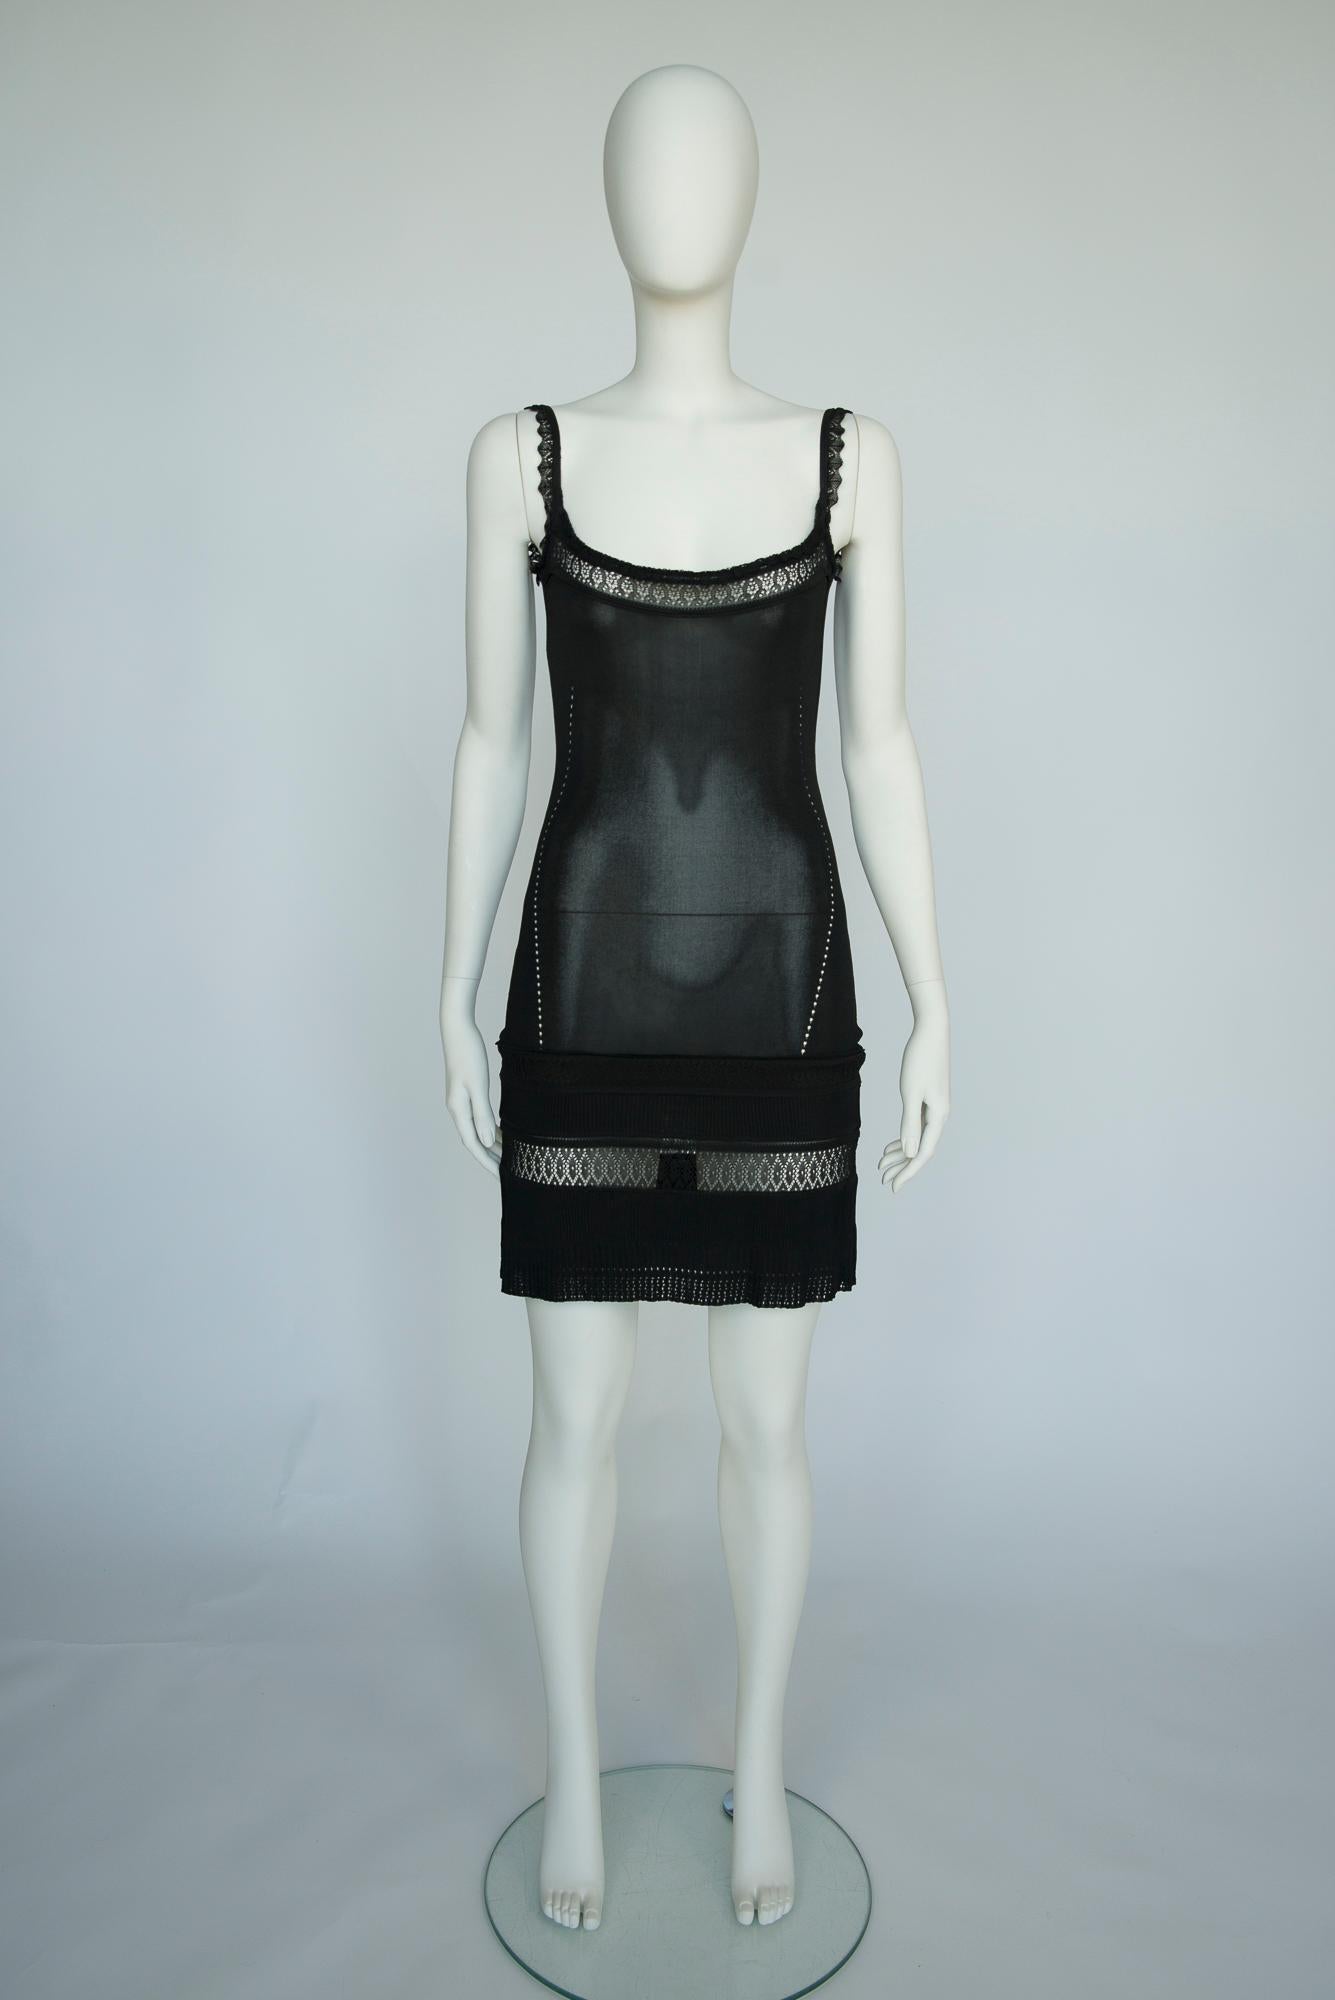 This one of a kind 1998 Spring-Summer Christian Dior by John Galliano dark brown slip dress is knitted for a figure-skimming fit with crocheted details, showing some skin in all the right places. The low scoop neckline, together with the soft and